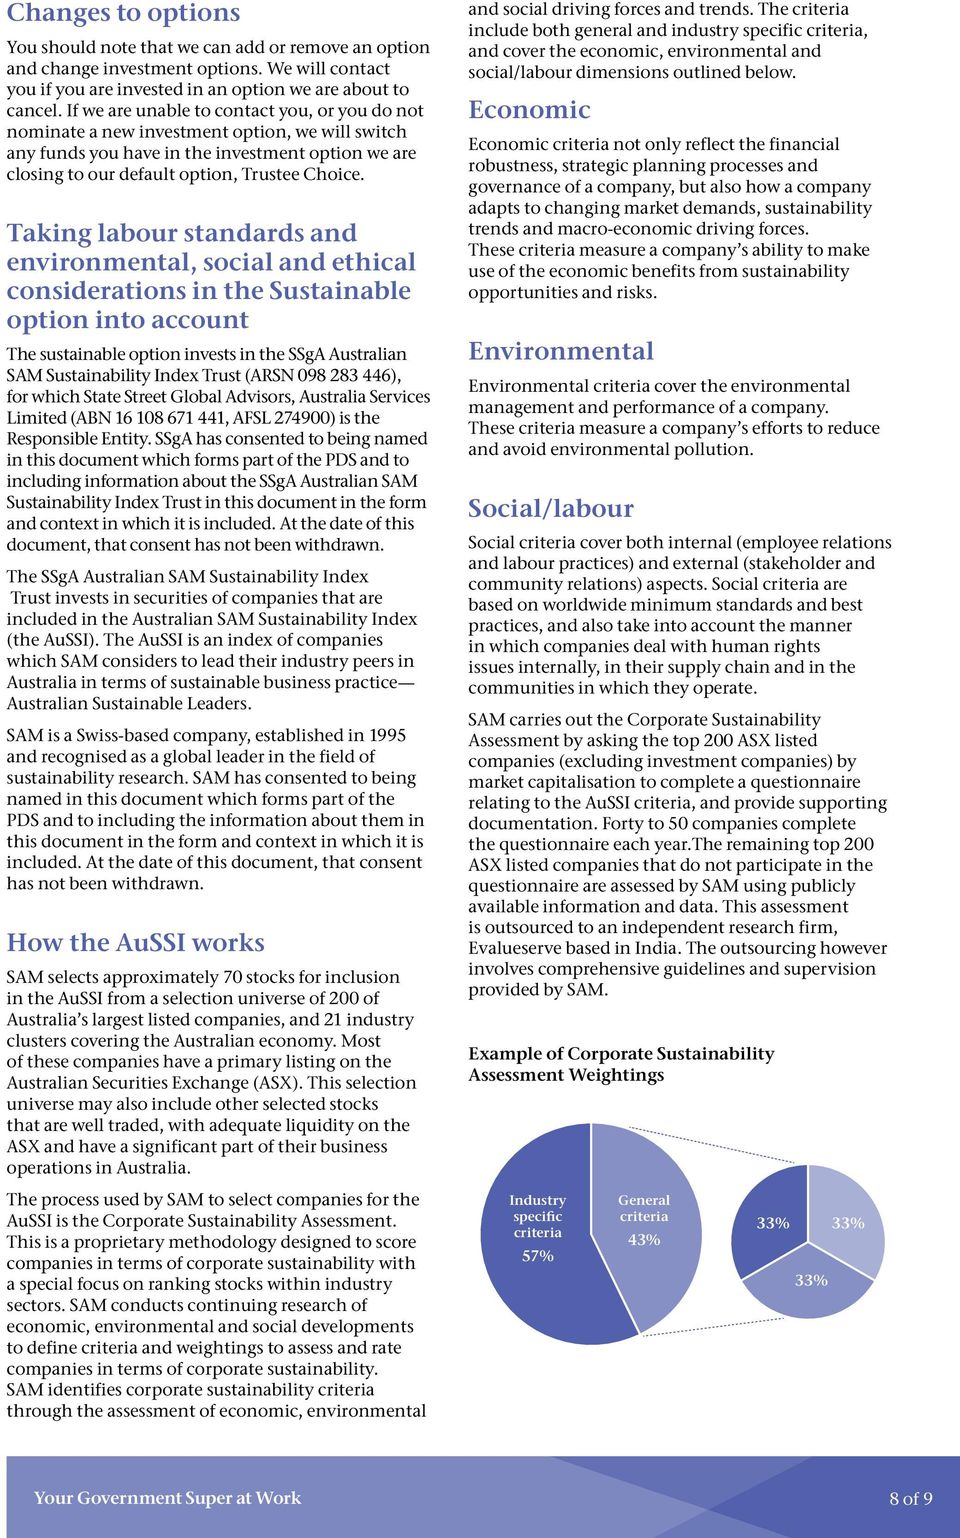 Taking labour standards and environmental, social and ethical considerations in the Sustainable option into account The sustainable option invests in the SSgA Australian SAM Sustainability Index